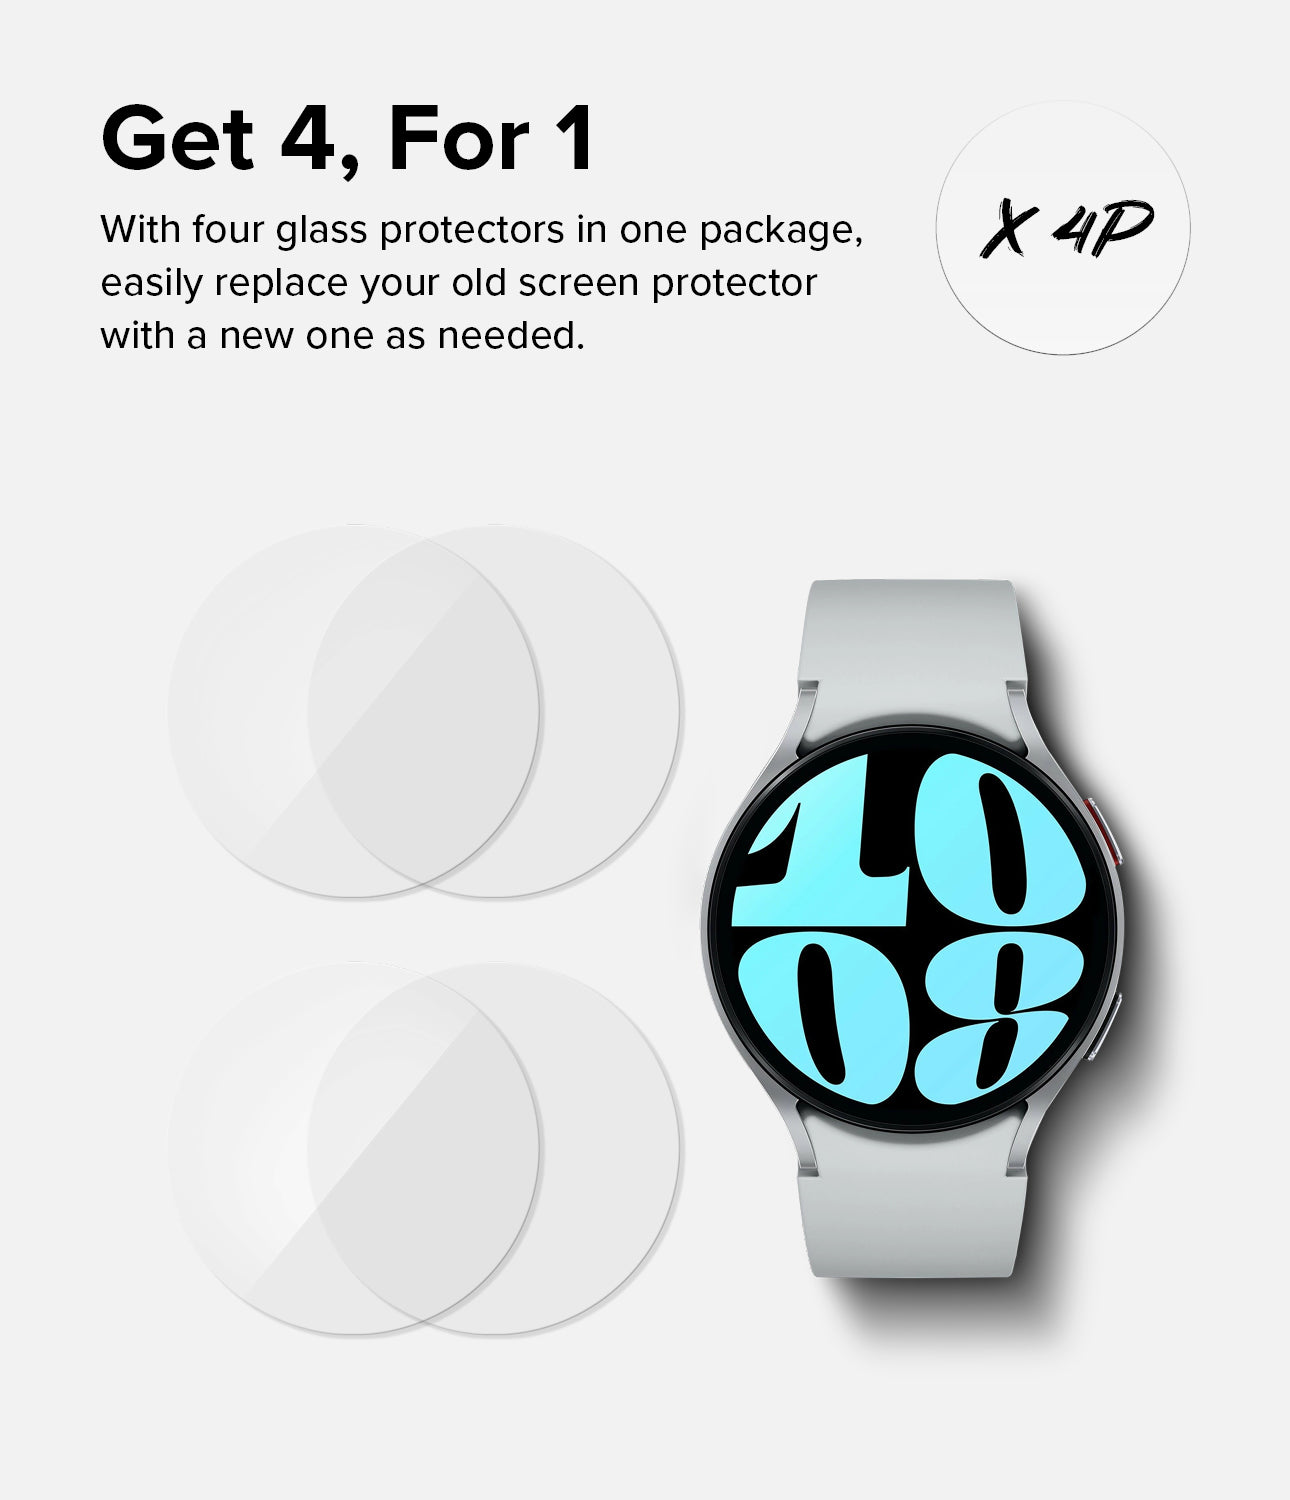 Galaxy Watch 6 40mm Screen Protector | Glass - R8 - Get 4 For 1. With four glass protectors in one package, easily replace your old screen protector with a new one as needed.